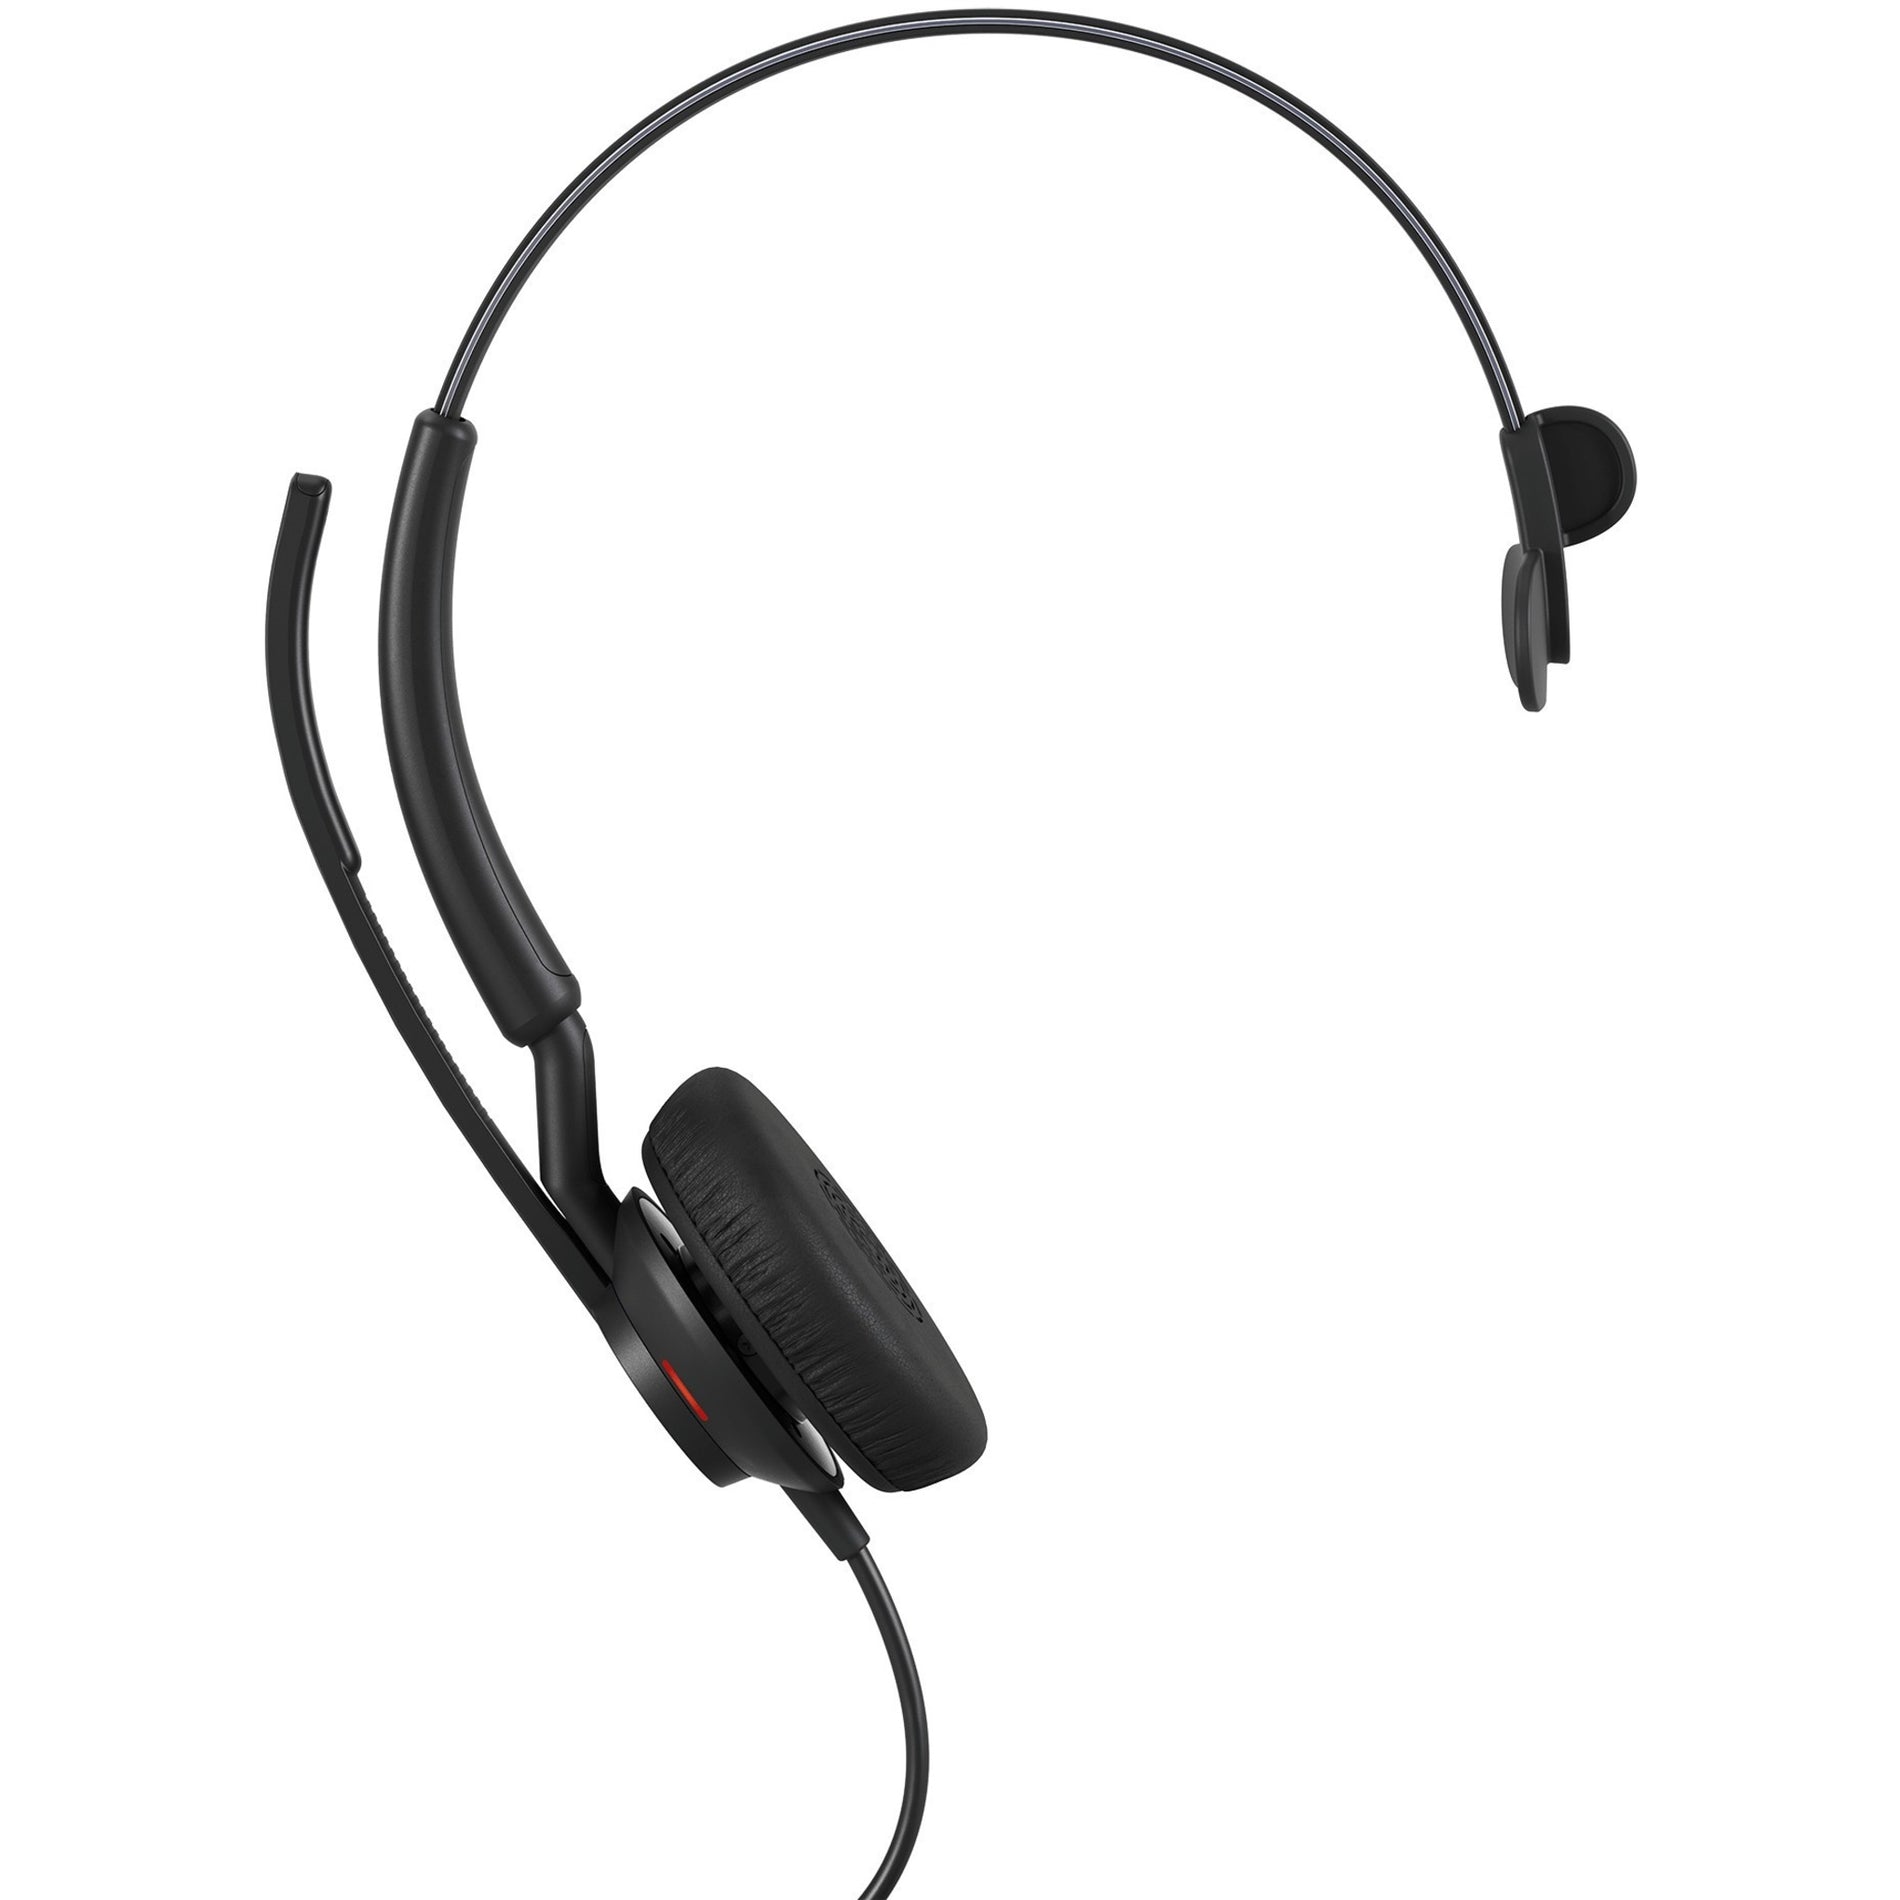 Jabra 5093-610-299 Engage 50 II Headset, Durable, Hearing Protection, Busylight, SafeTone 2.0 Technology, Mono Sound, Wired, USB Type C Interface